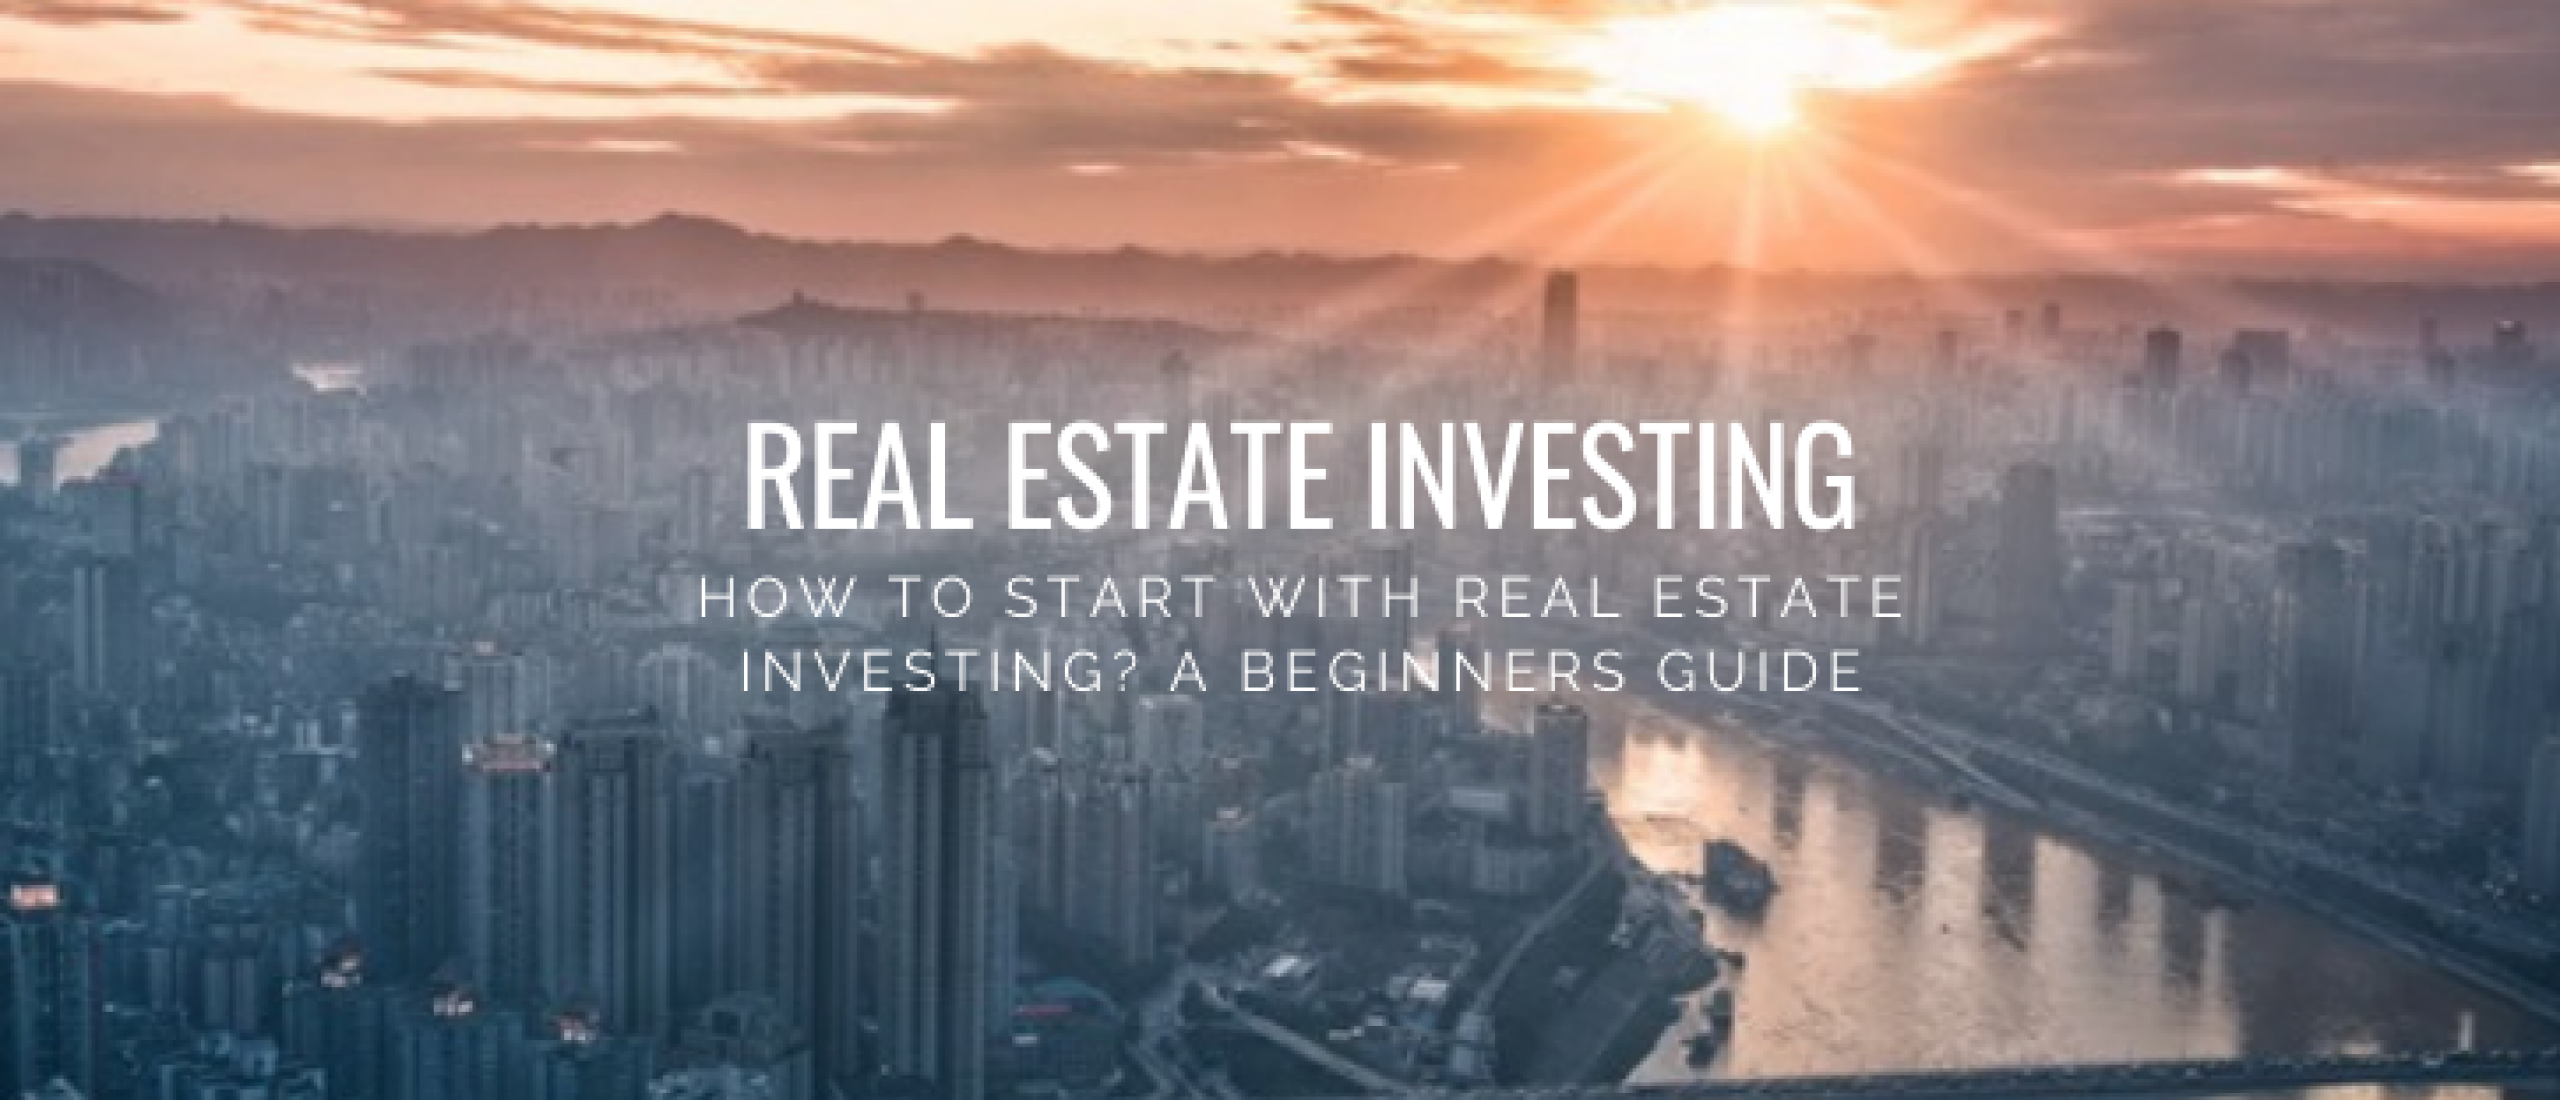 How to Start With Real Estate Investing? [2022] Beginners Guide